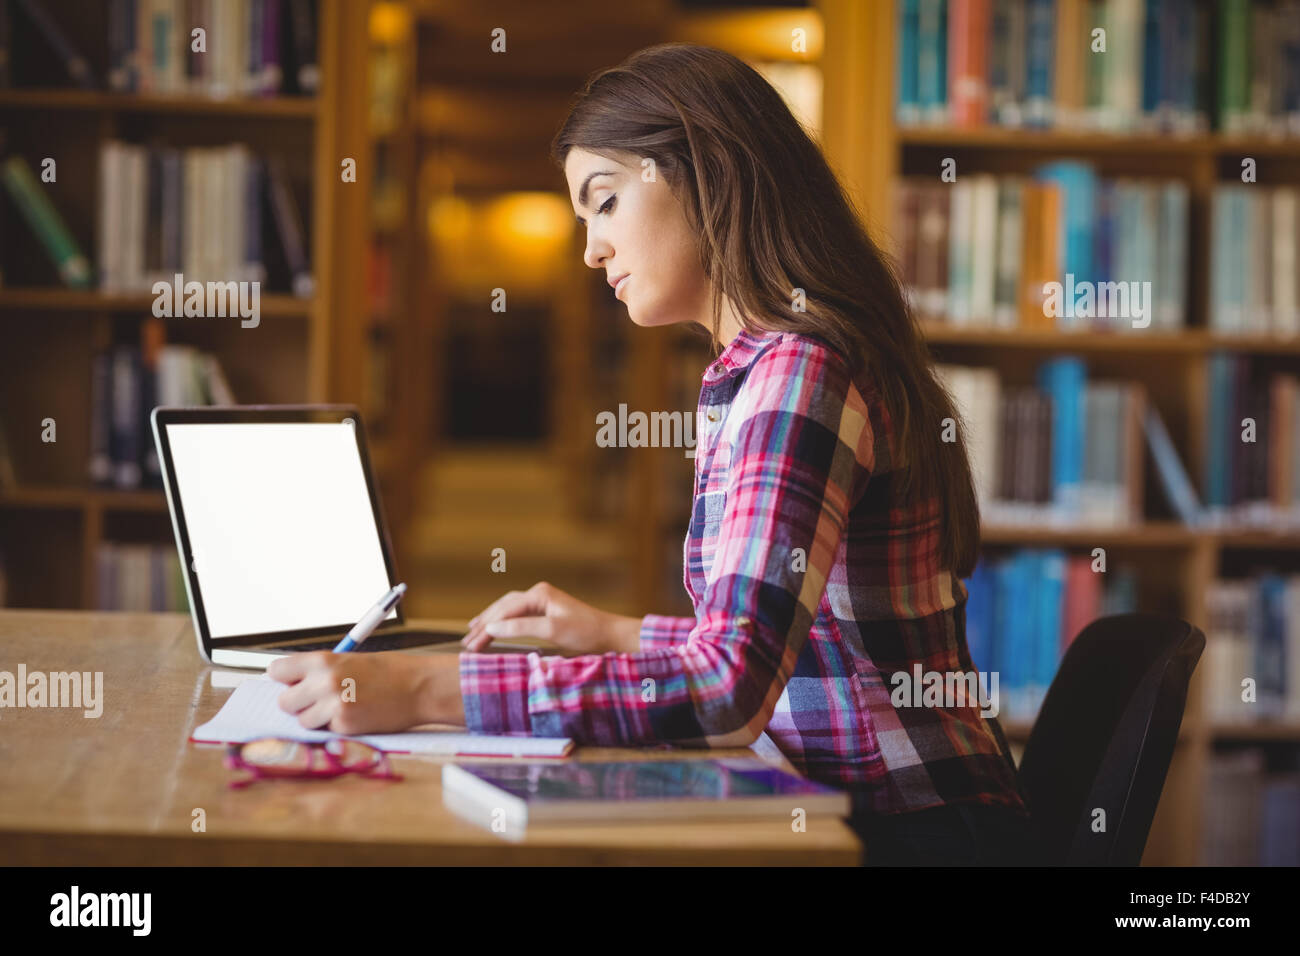 Female student with laptop writing on book Stock Photo